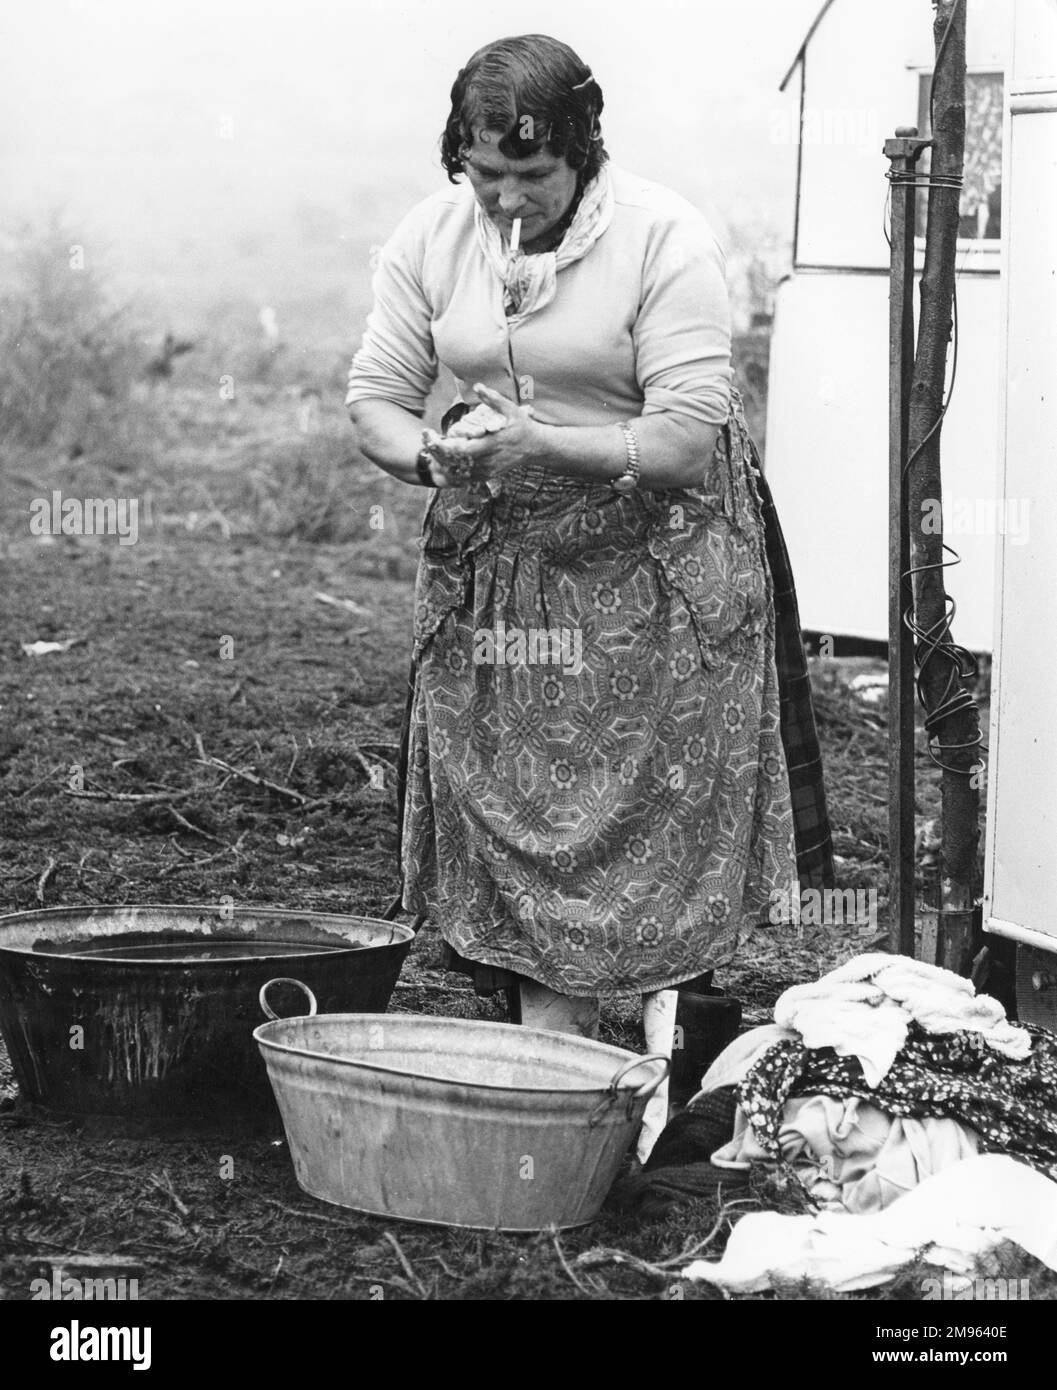 https://c8.alamy.com/comp/2M9640E/an-old-gipsy-woman-wearing-an-apron-and-smoking-a-cigarette-soaps-up-her-hands-as-she-prepares-to-wash-a-pile-of-clothes-by-hand-in-a-metal-basin-2M9640E.jpg